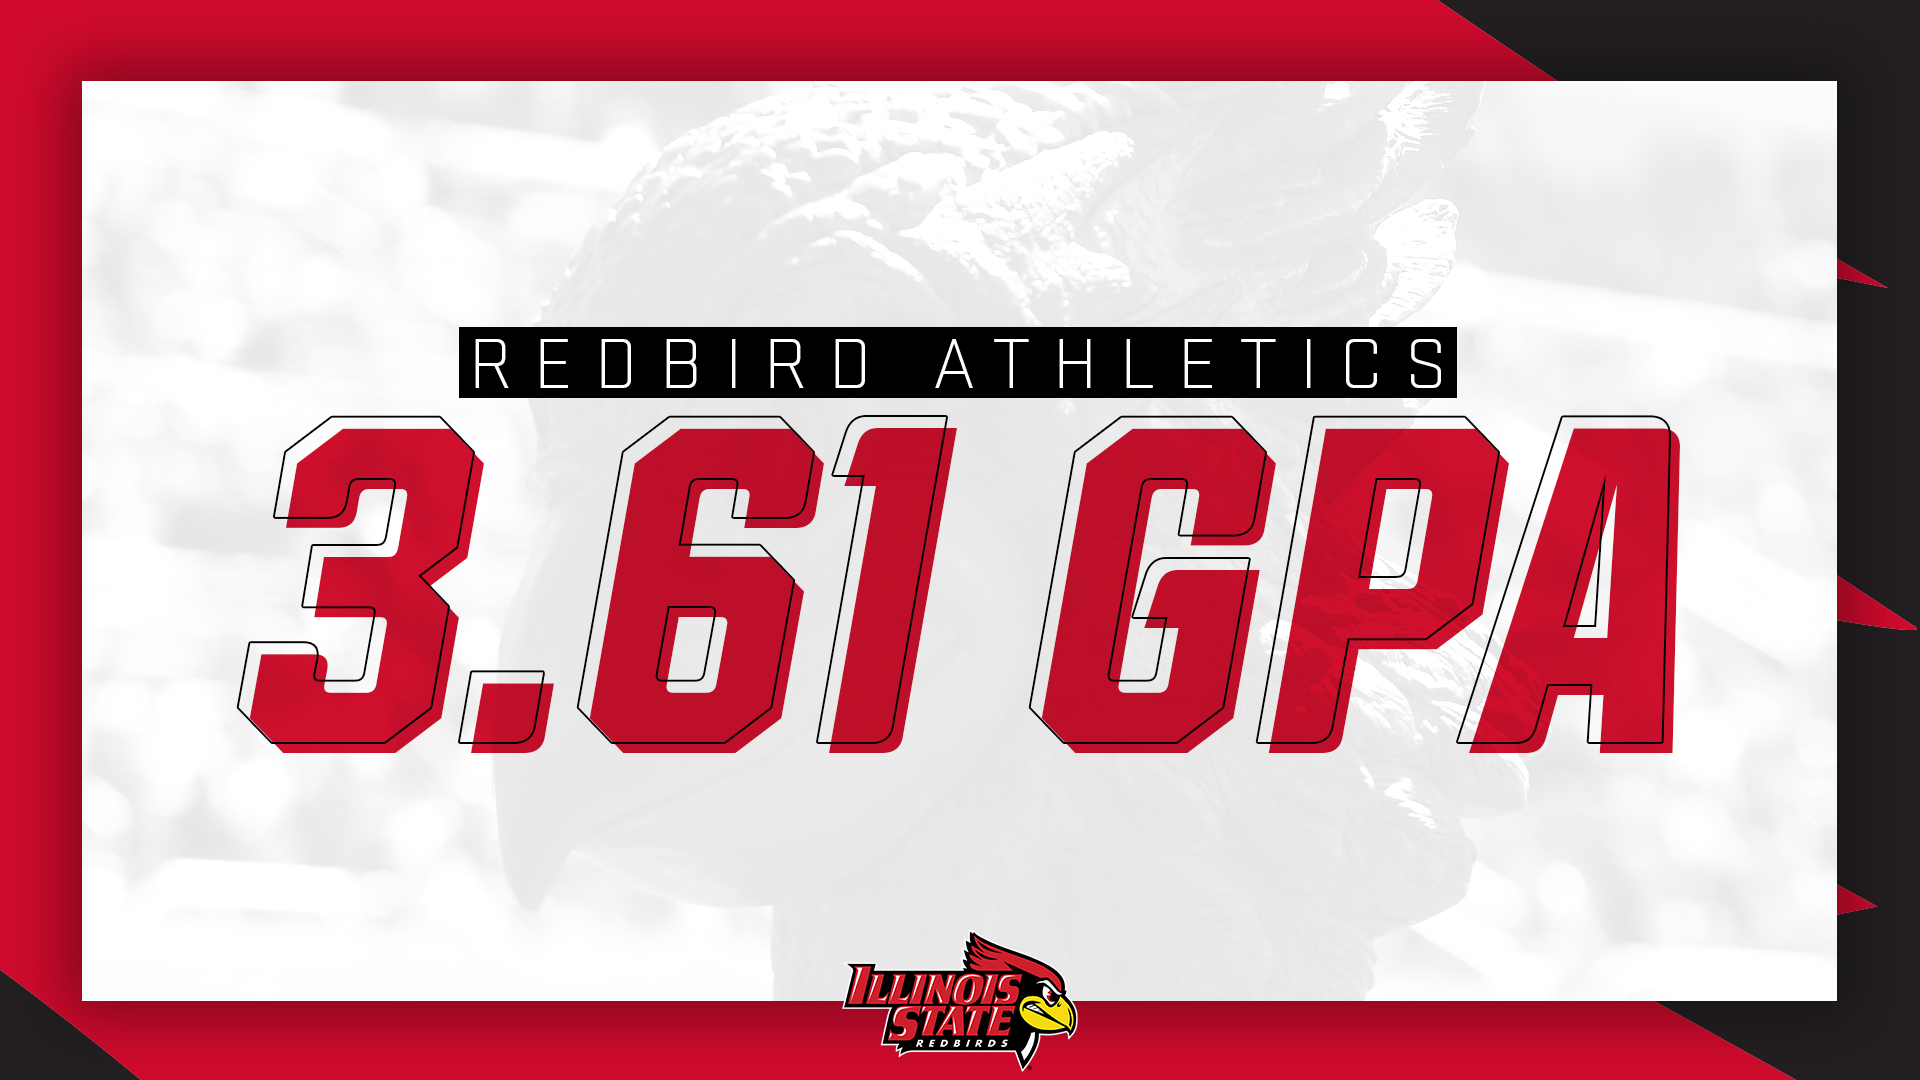 Redbird athletics department gpa record topped once again